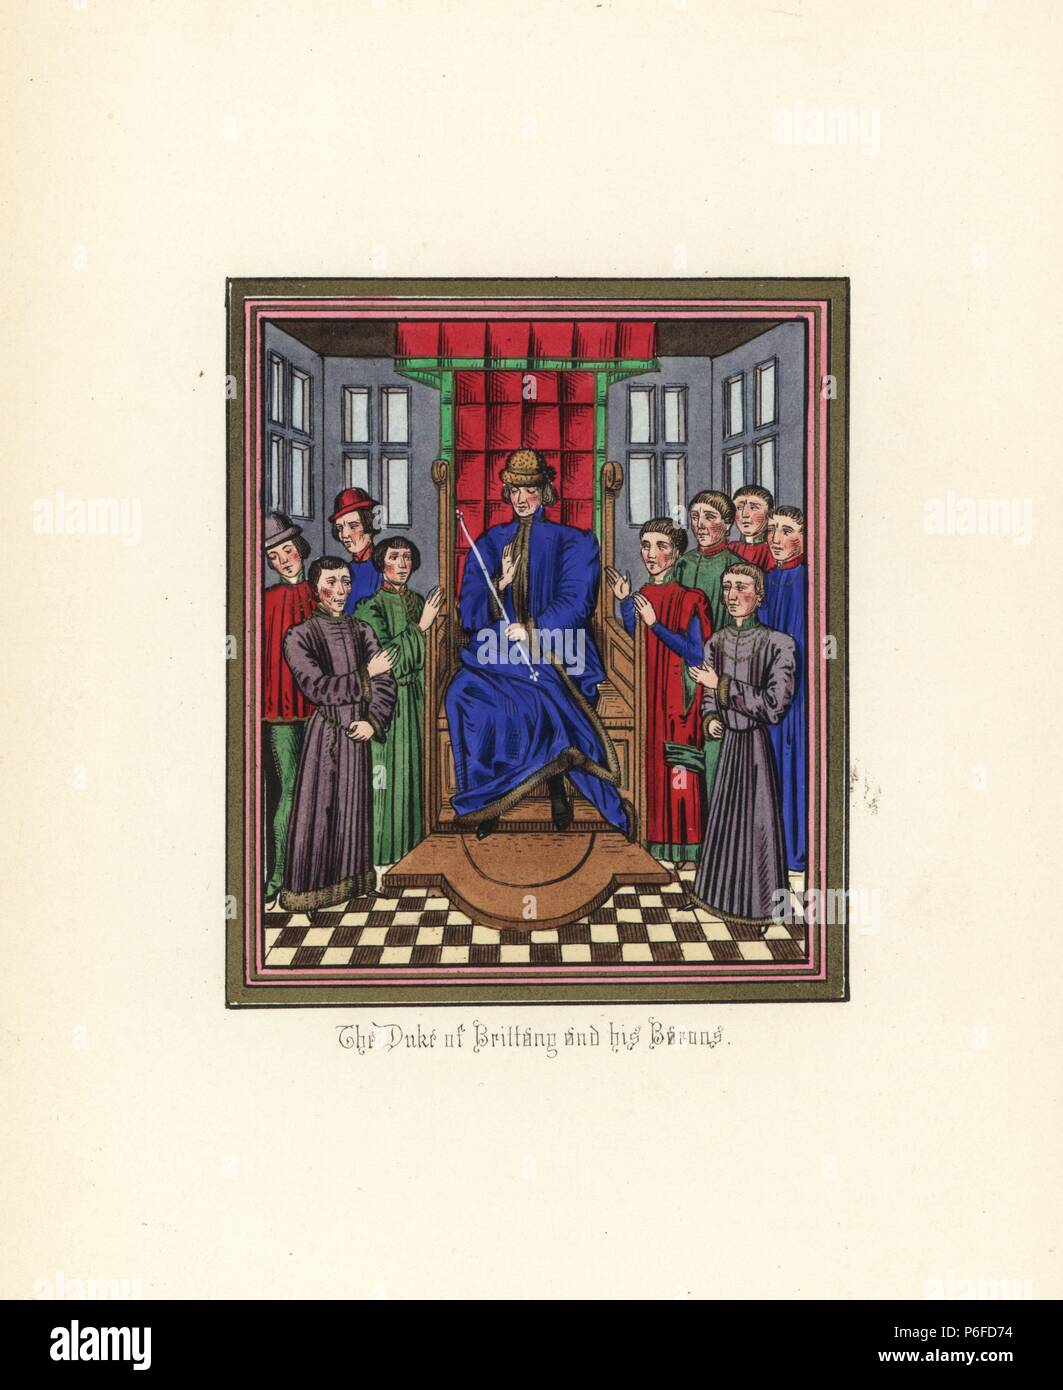 Lord Jean de Montfort, Duke of Brittany (1294-1345), and his barons. Handcoloured lithograph after an illuminated manuscript from Sir John Froissart's 'Chronicles of England, France, Spain and the Adjoining Countries, from the Latter Part of the Reign of Edward II to the Coronation of Henry IV,' George Routledge, London, 1868. Stock Photo